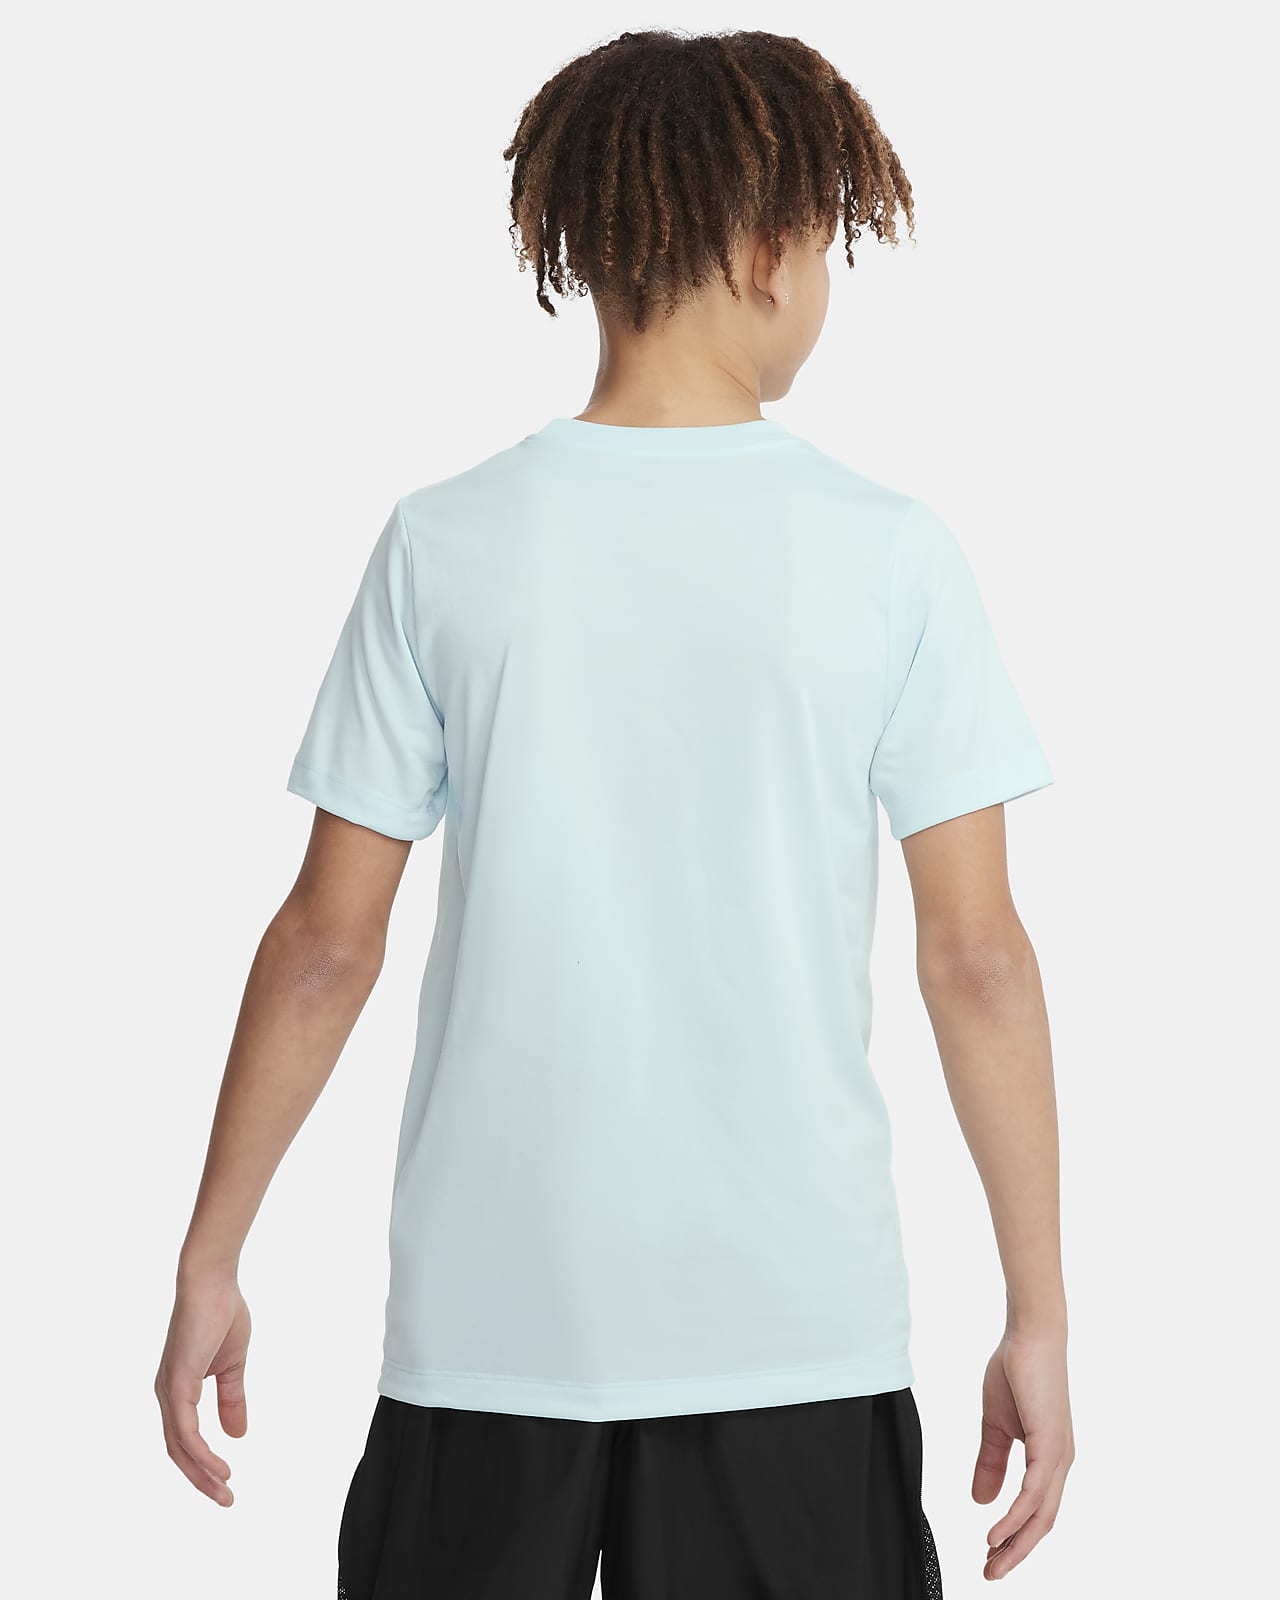 Athletic Heather Gray Youth Tee - Too Cool Sportswear